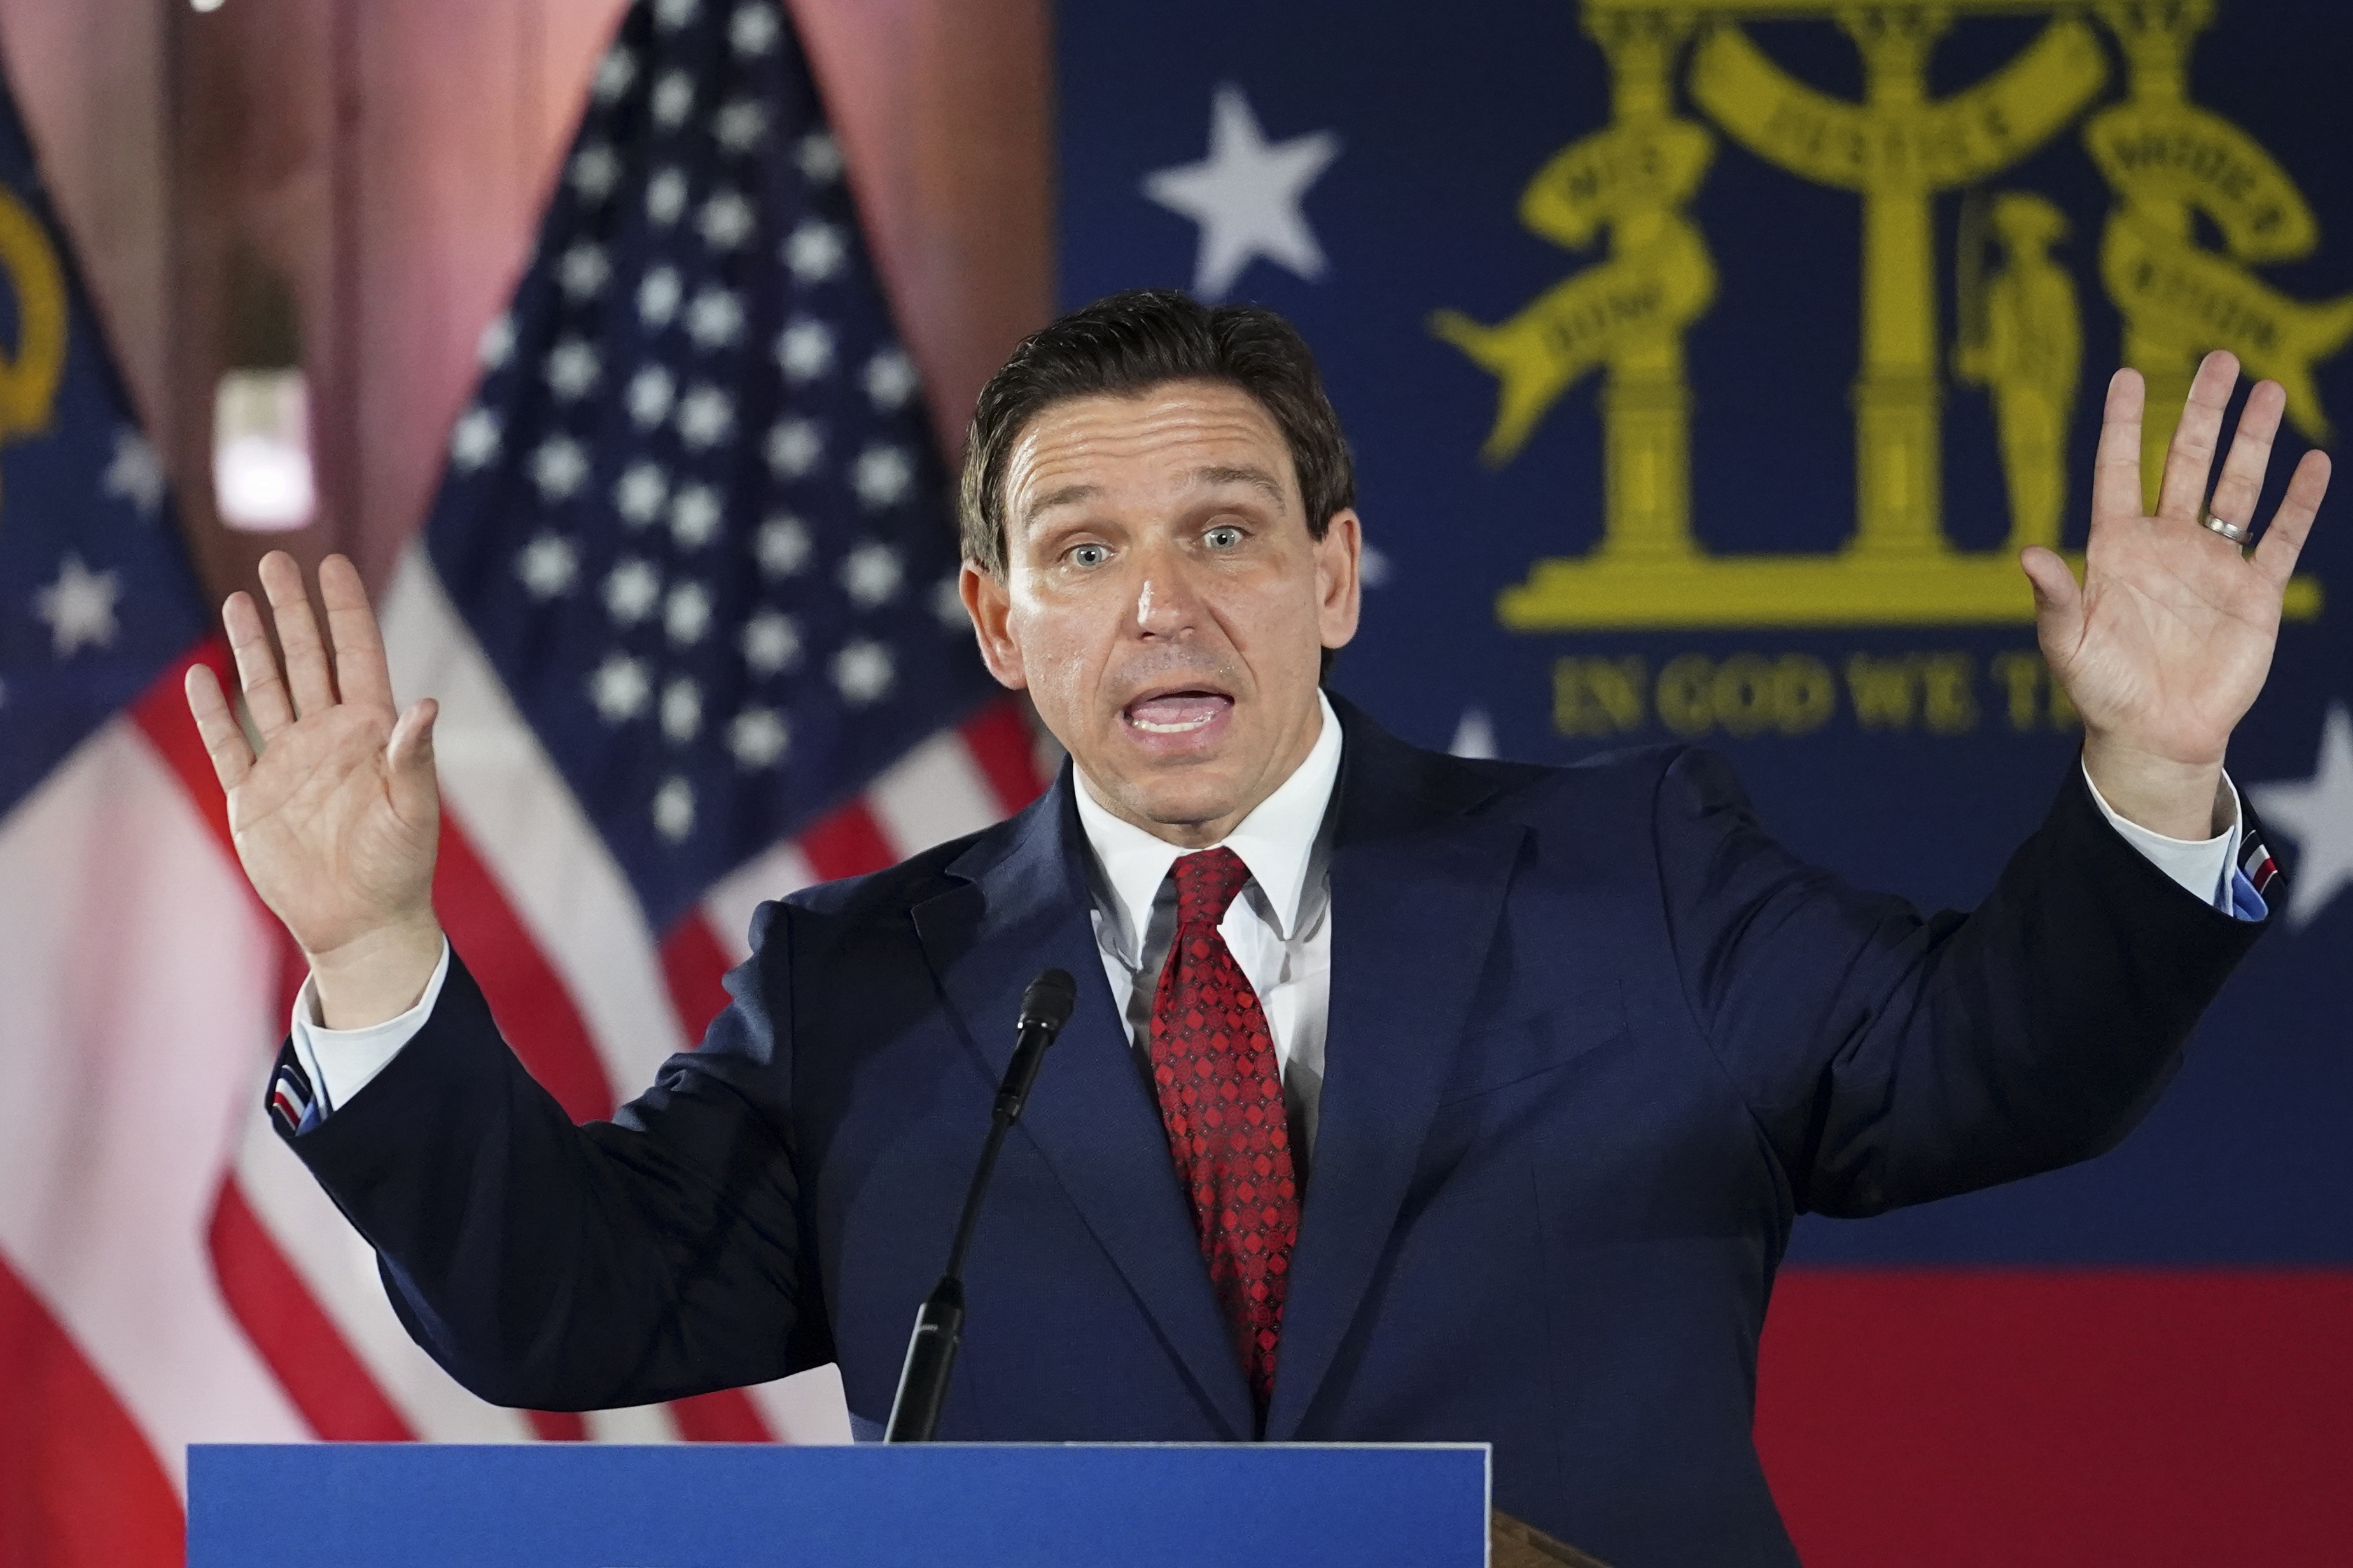 DeSantis calls Trump indictment ‘un-American’ and says he won’t assist in extradition